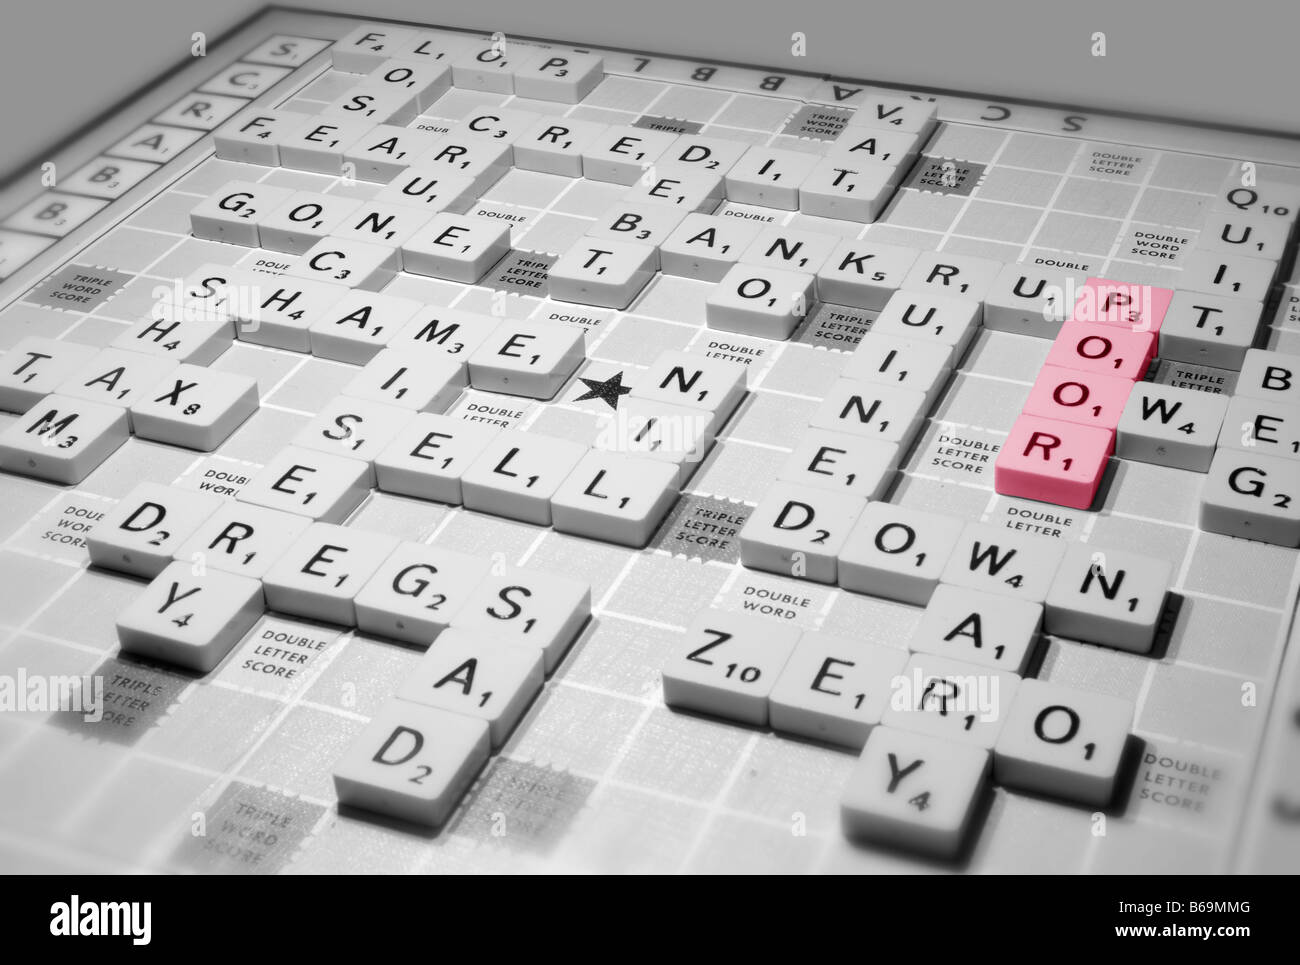 A scrabble game highlights global recession issues of the credit crunch and other financial implications Stock Photo